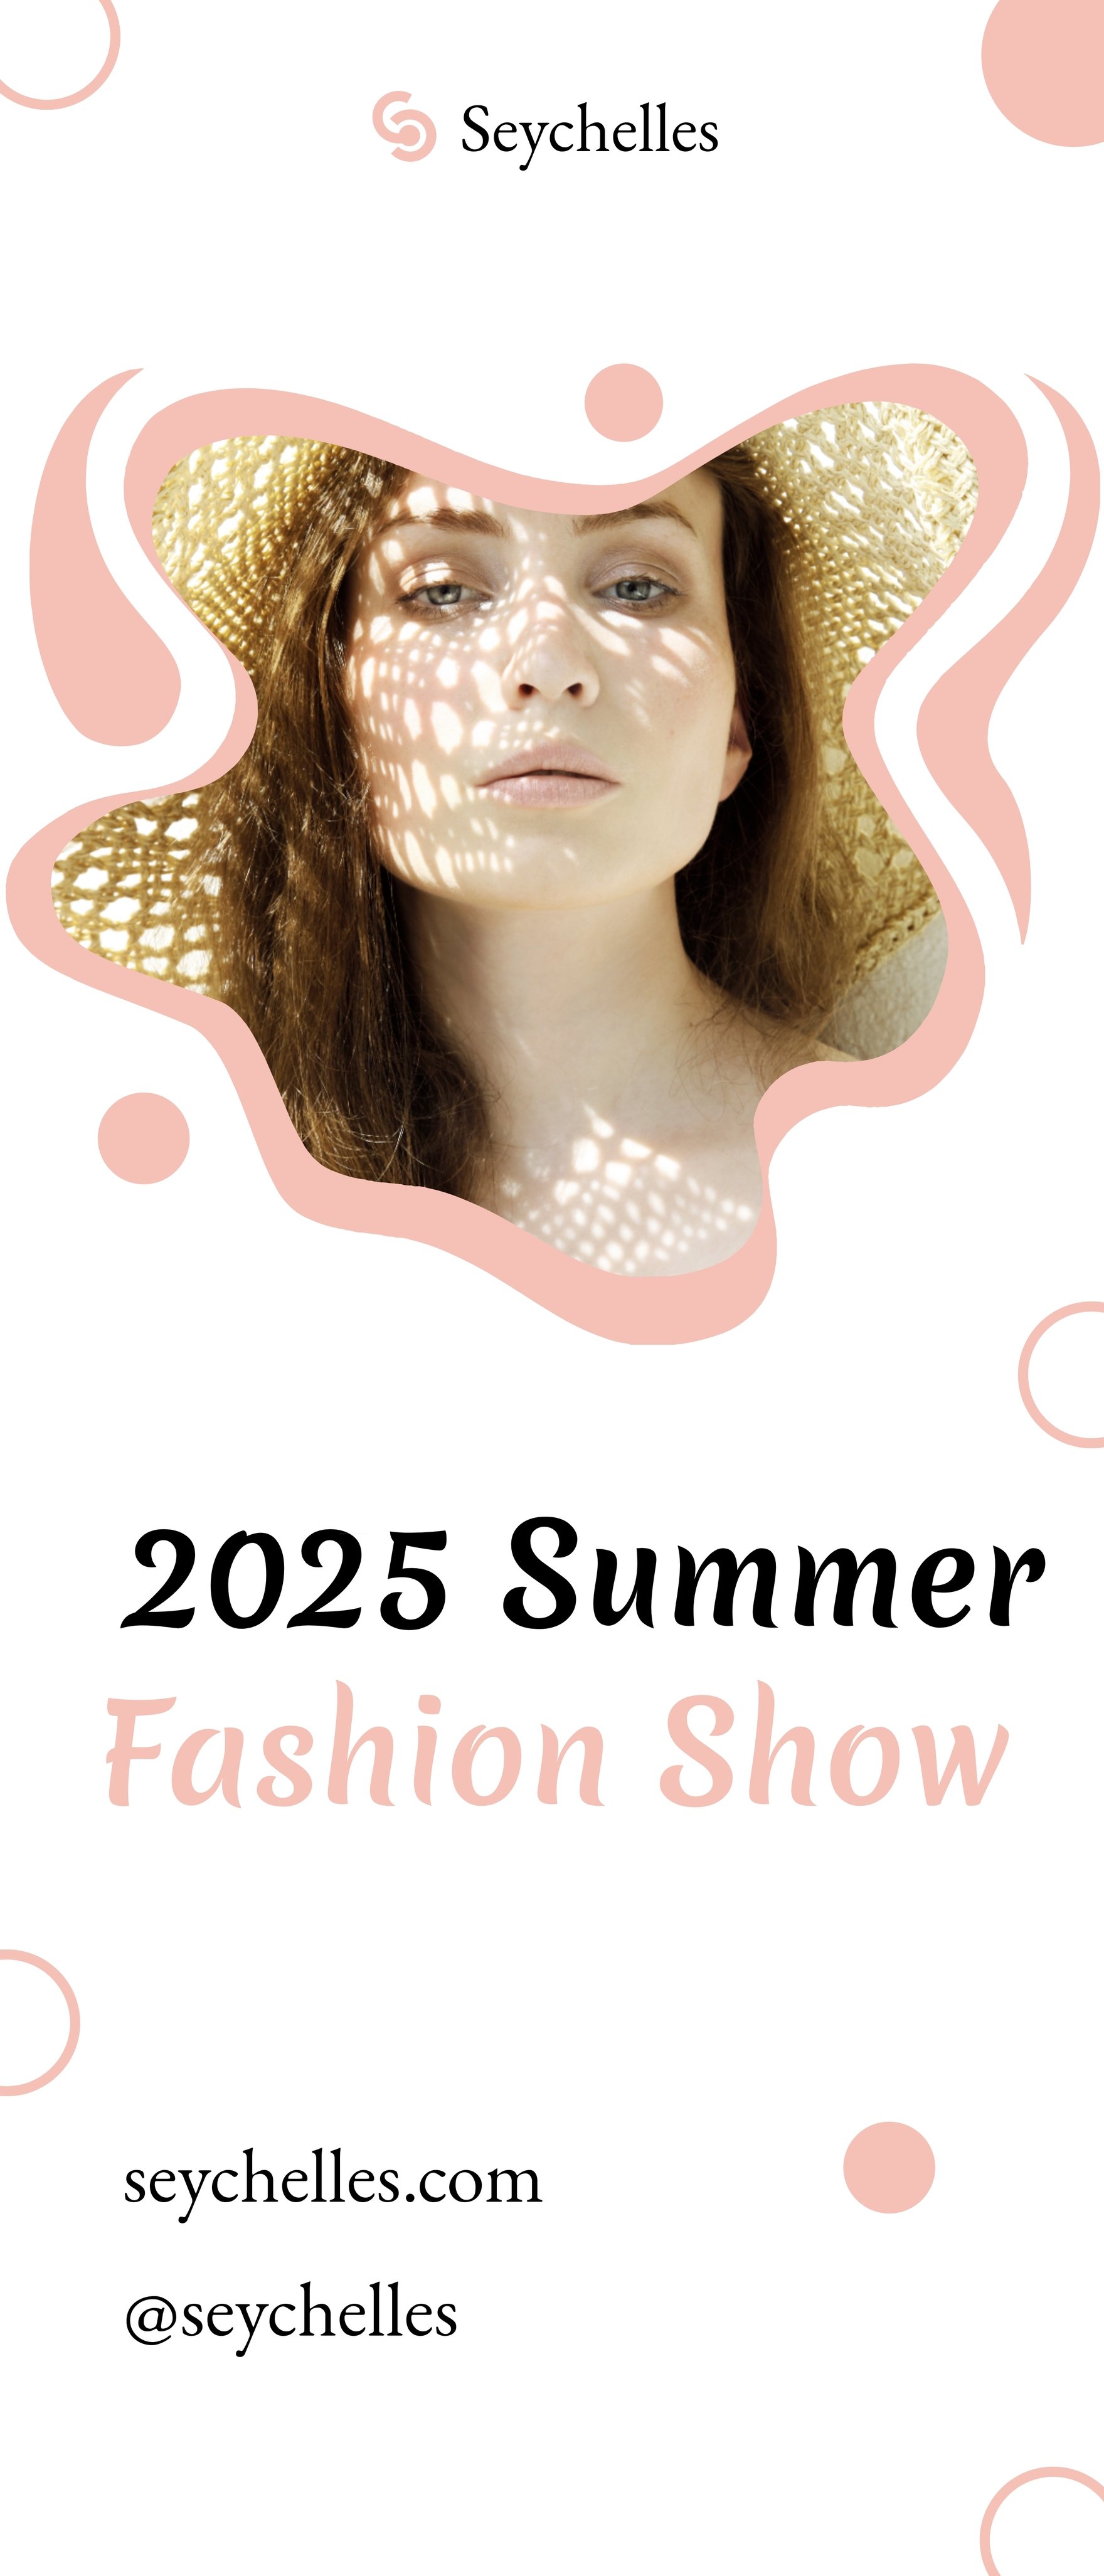 Fashion Show Roll-Up Banner Template